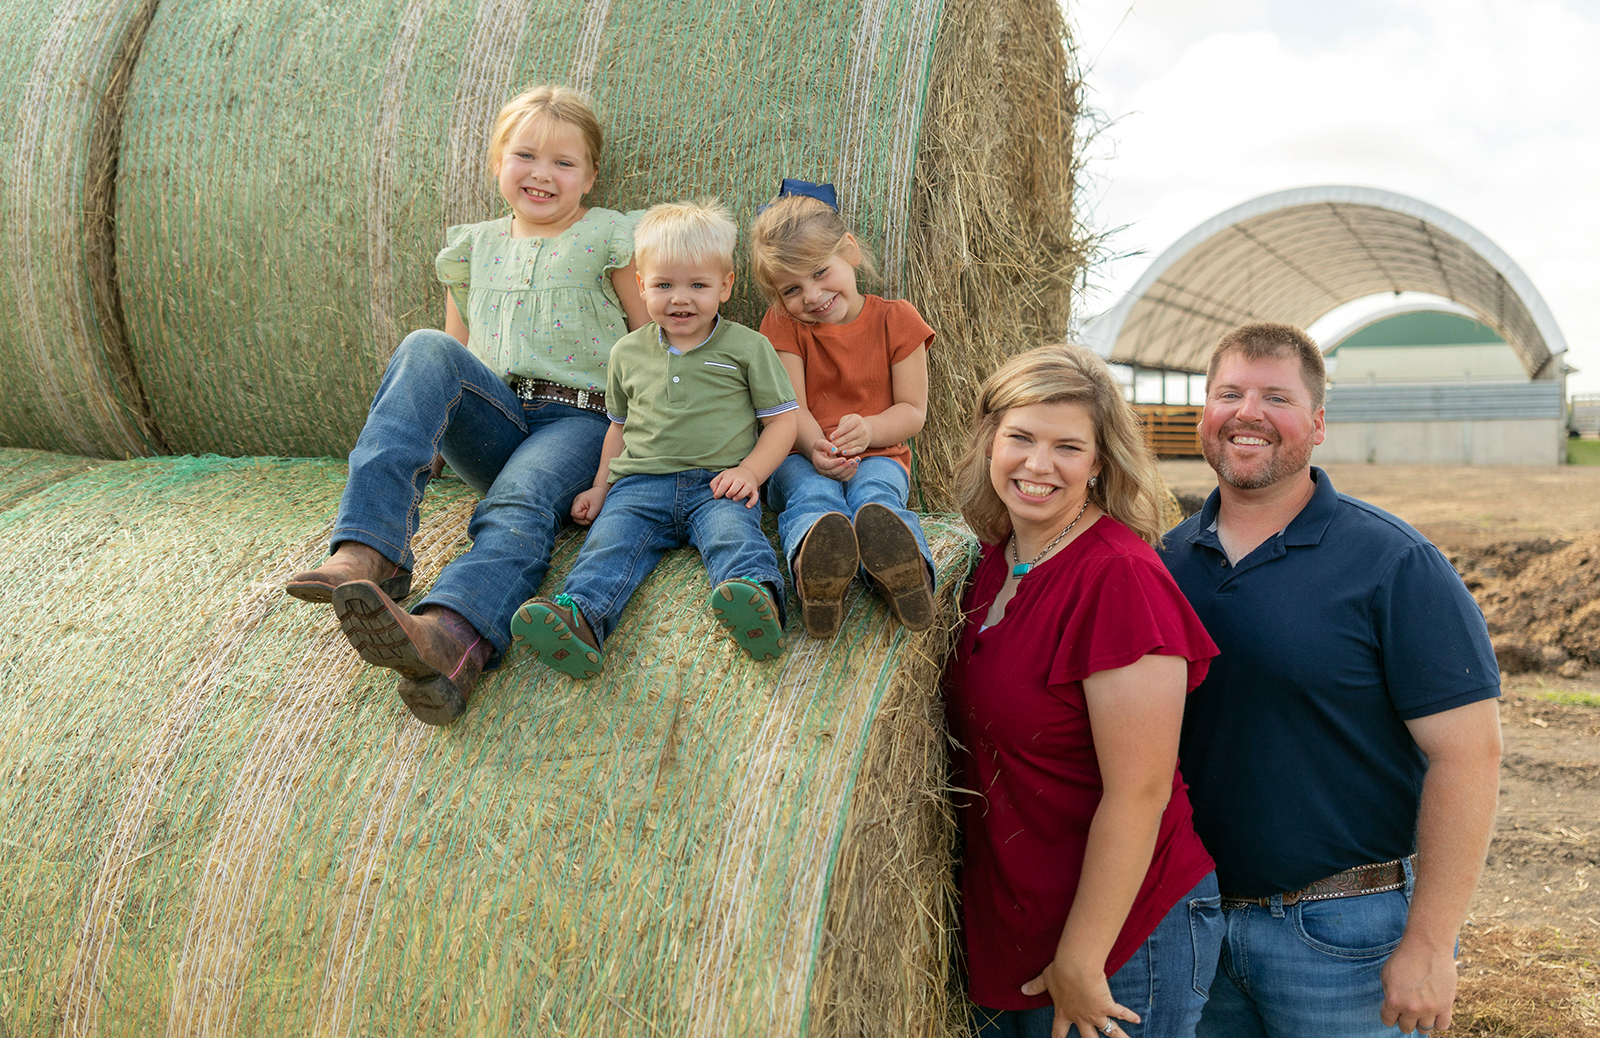 Sara Preston smiles with her husband and three children in an outdoor family photo on their farm. The children sit atop a hay bale. Sara and her husband stand next to them.